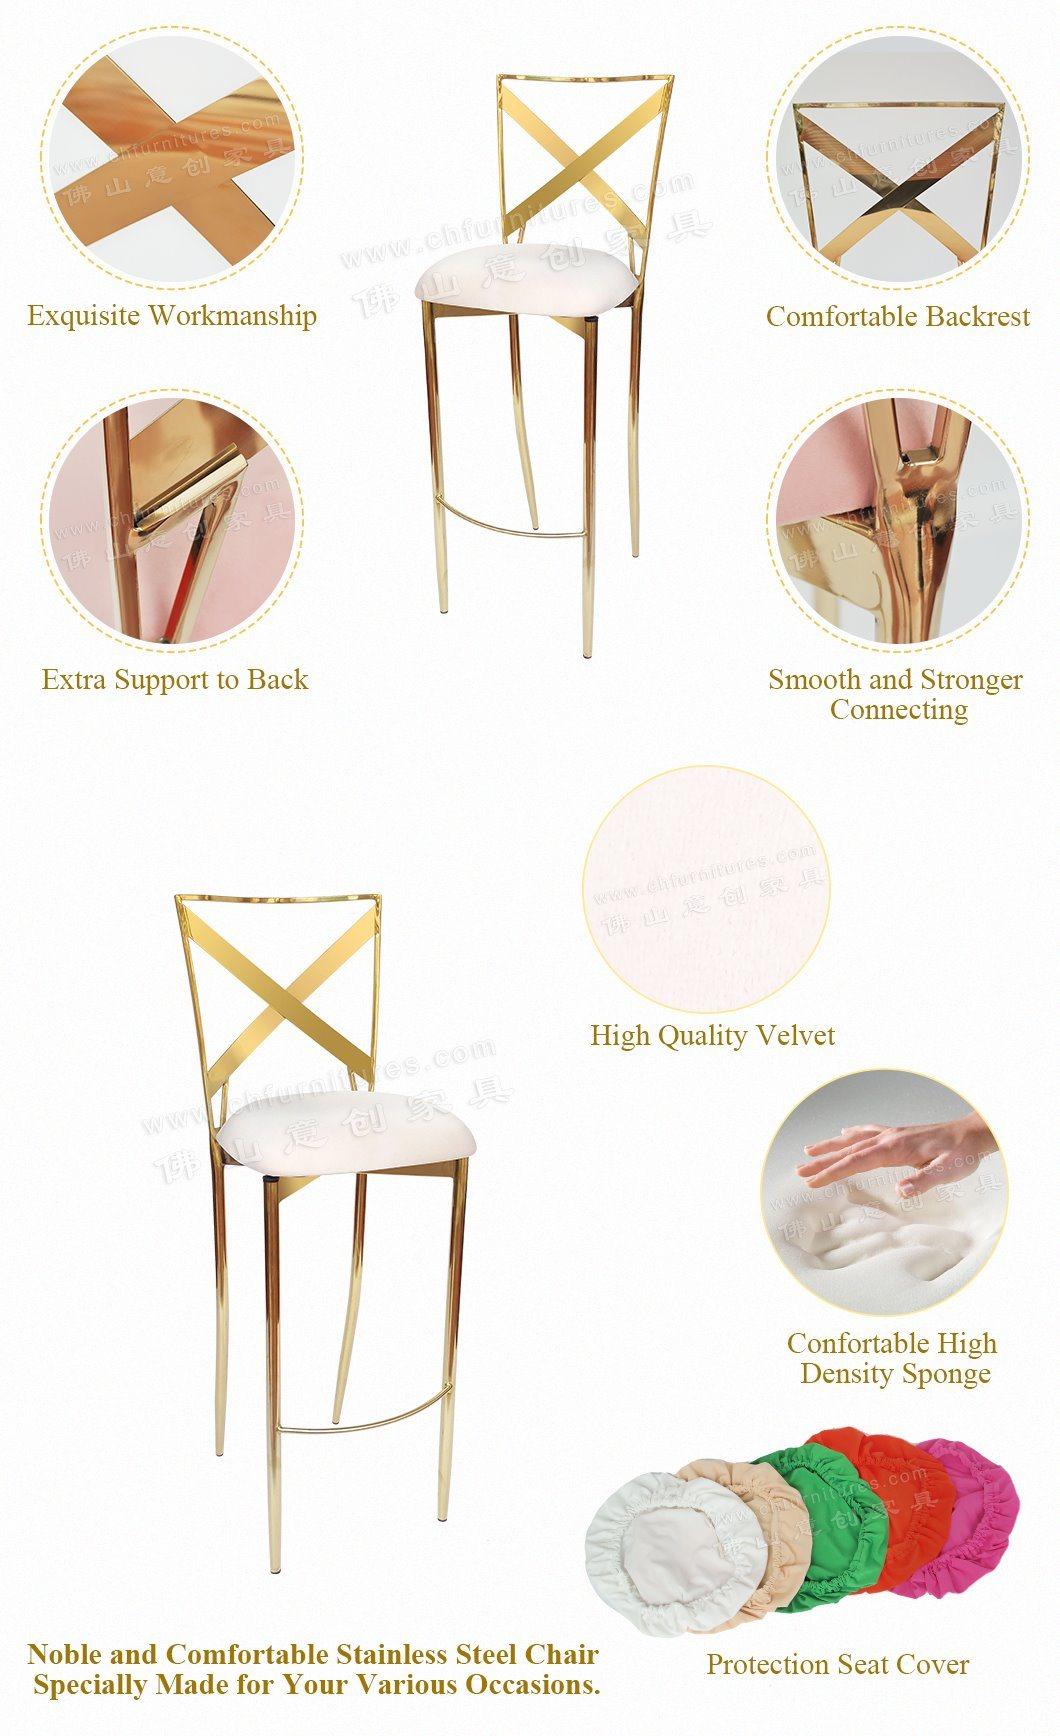 Hyc-H024 Hot Modern Gold Banquet Stackable Bar Chair PU Leather for Sale